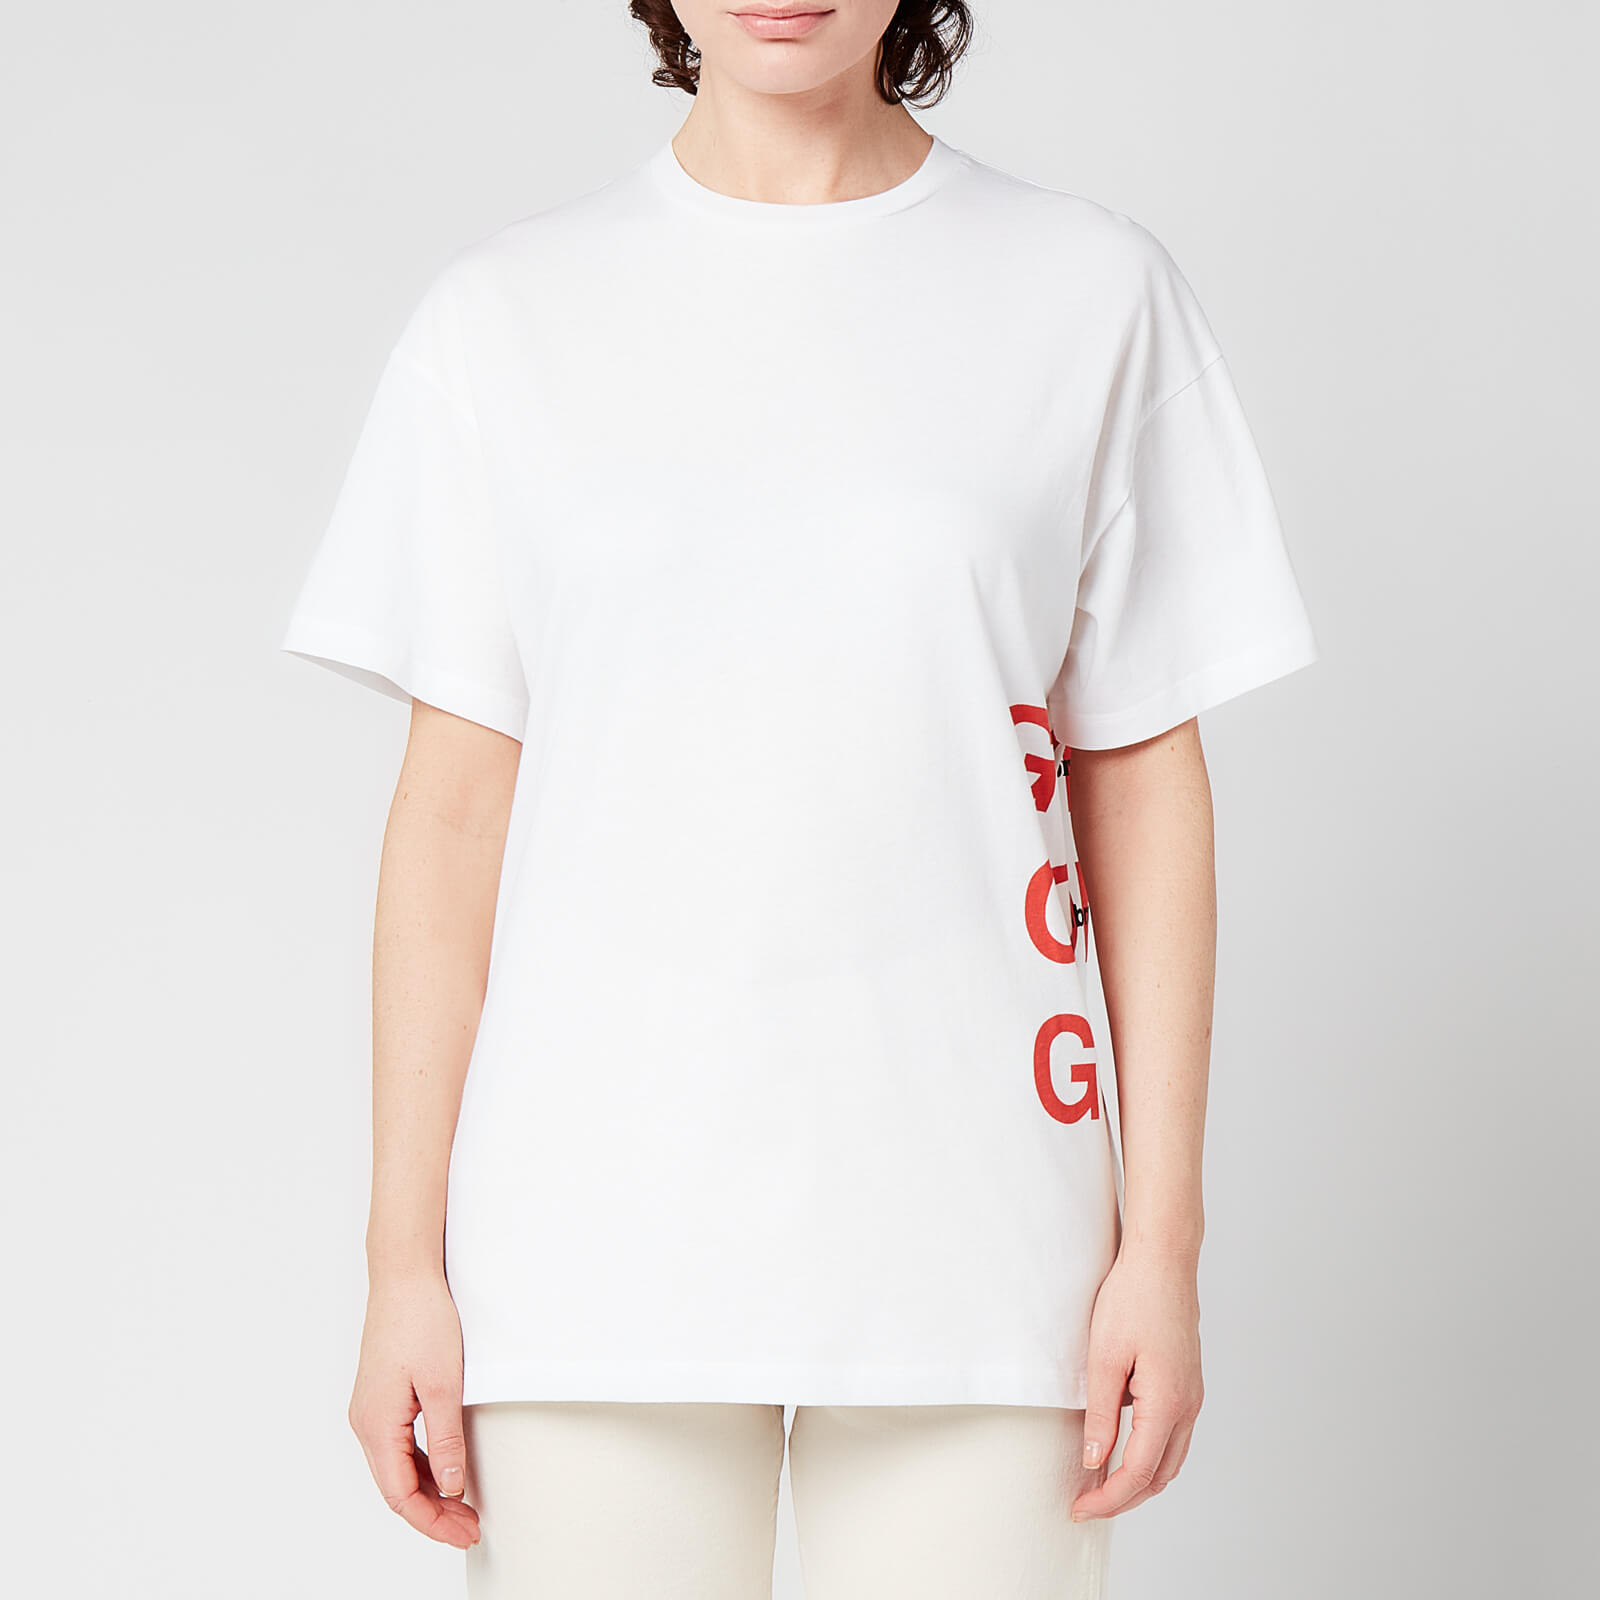 Etre Cecile Women's Good Vibes Band T-Shirt - White